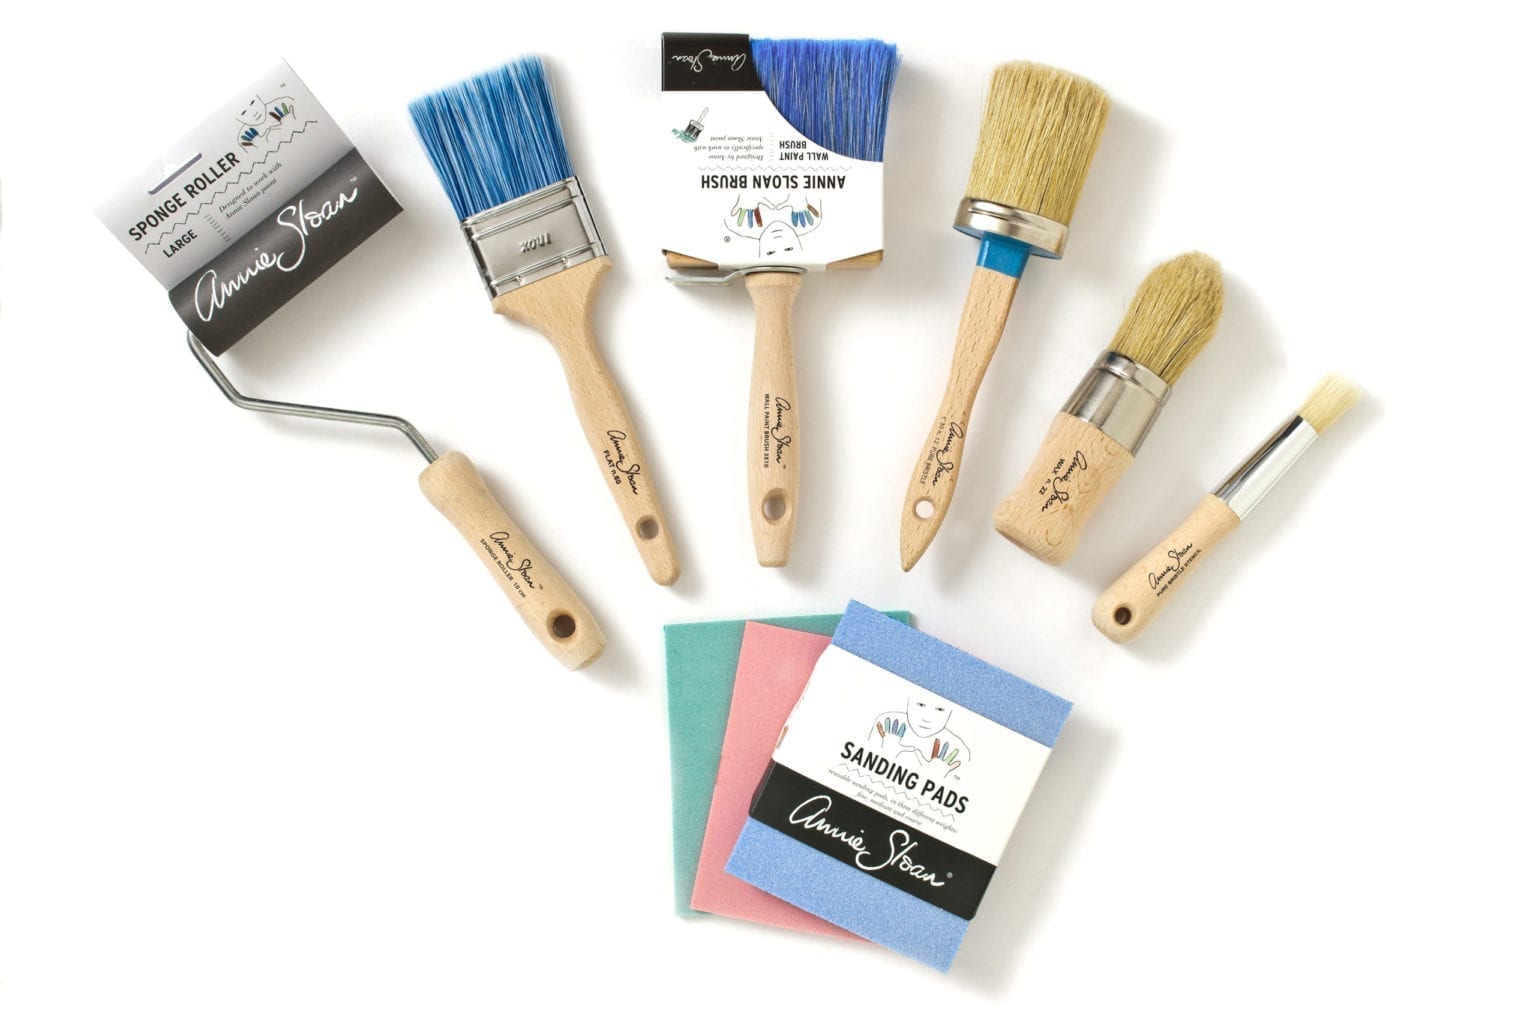 Chalk-Paint-by-Annie-Sloan-Brushes-and-tools-rollers-sanding-pads-3000-scaled